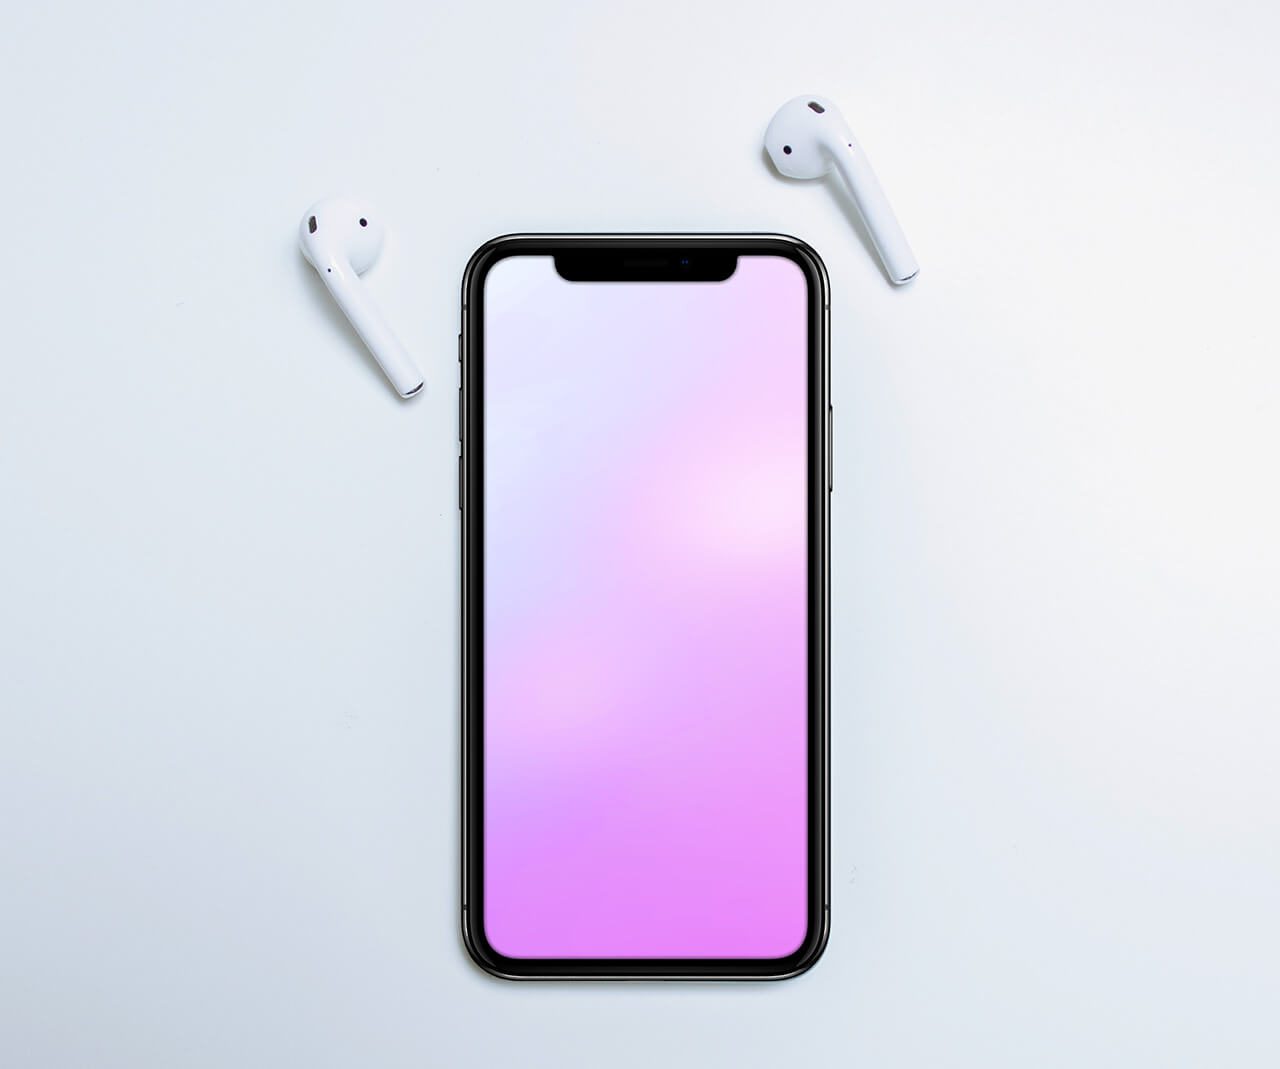 19-music-app-airpods-iphone-mockup-template